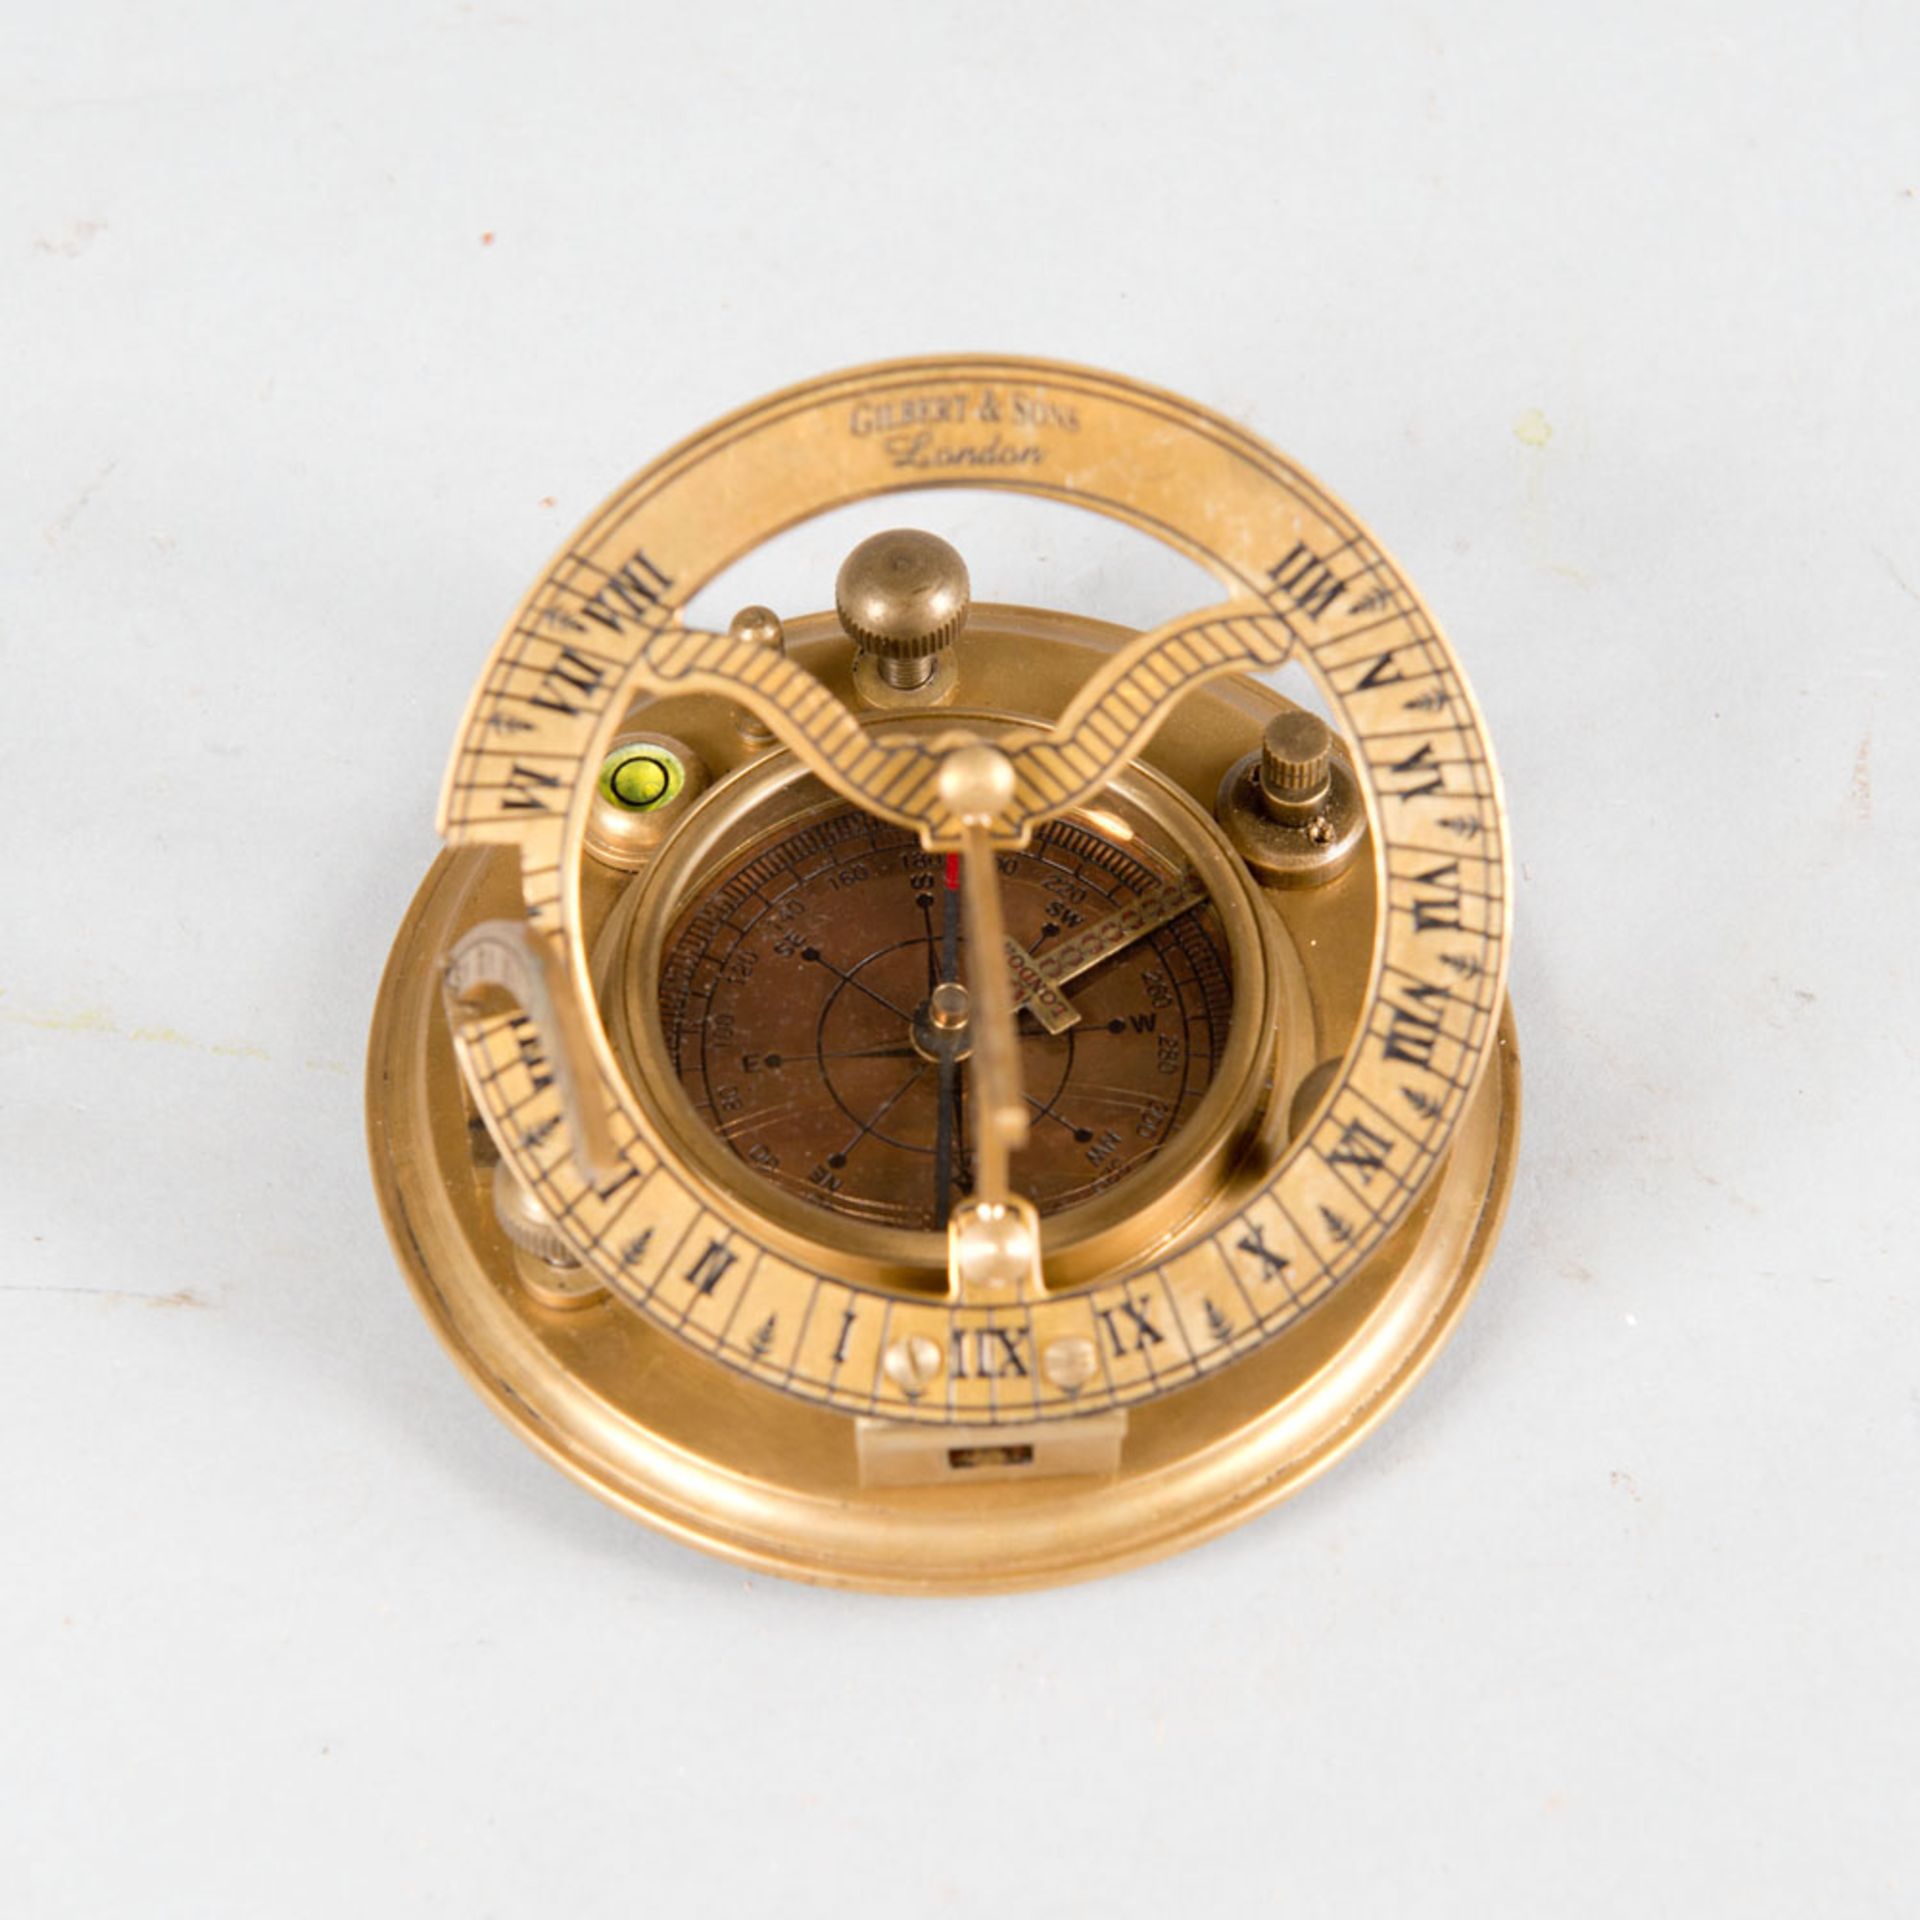 Gilbert and Sons Compass - Image 2 of 3